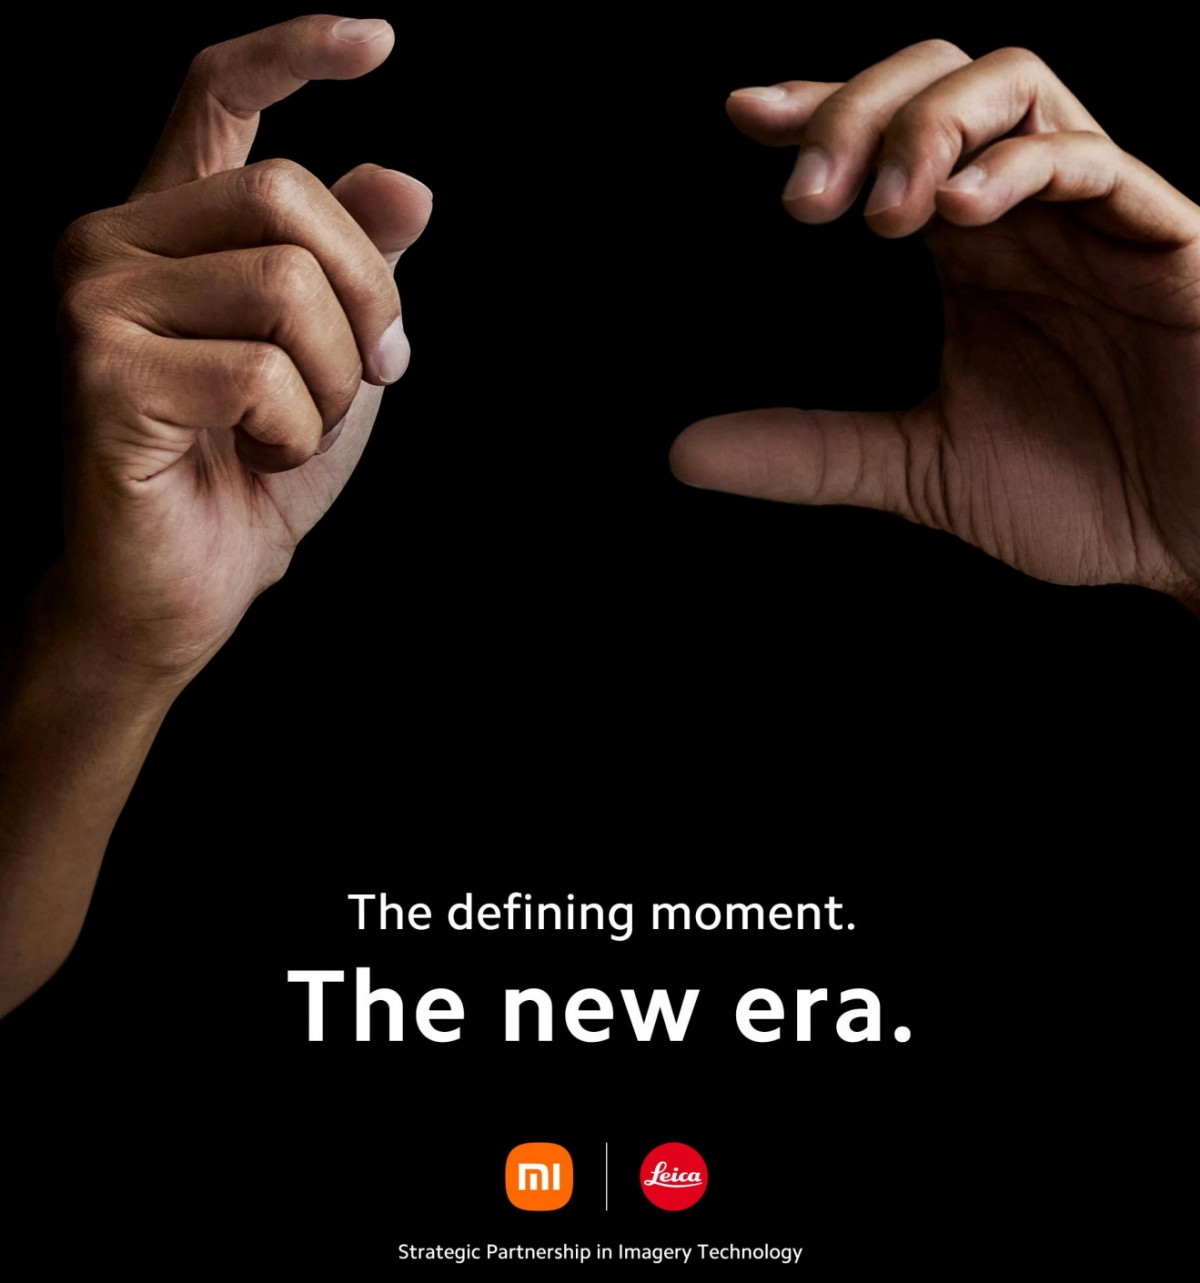 Xiaomi officially announces partnership with Leica, first jointly developed phone arrives in July